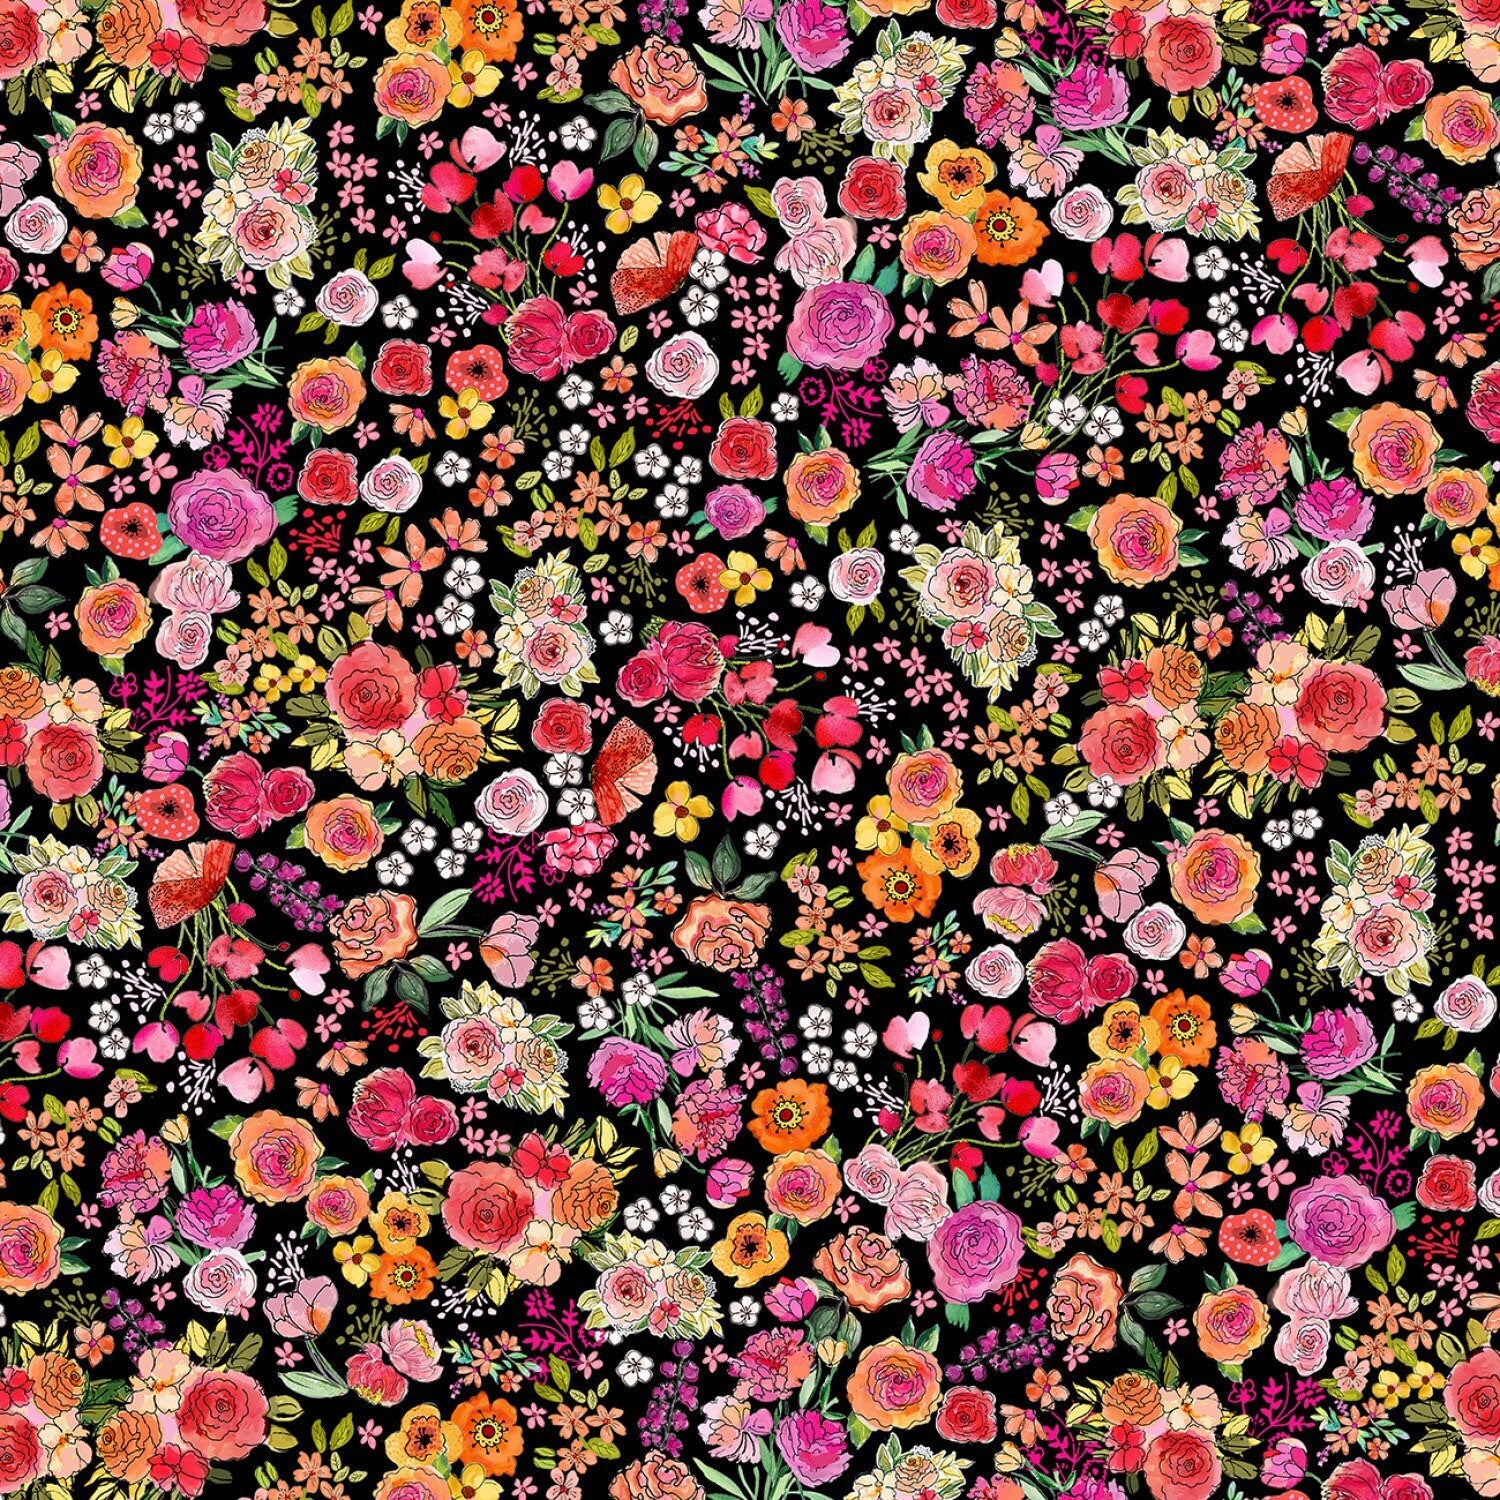 Sew Floral Fabric - By The Half Yard - BTHY - Black Sewing Large Florals - Gail Cadden - Timeless Treasures - C8933 BLACK